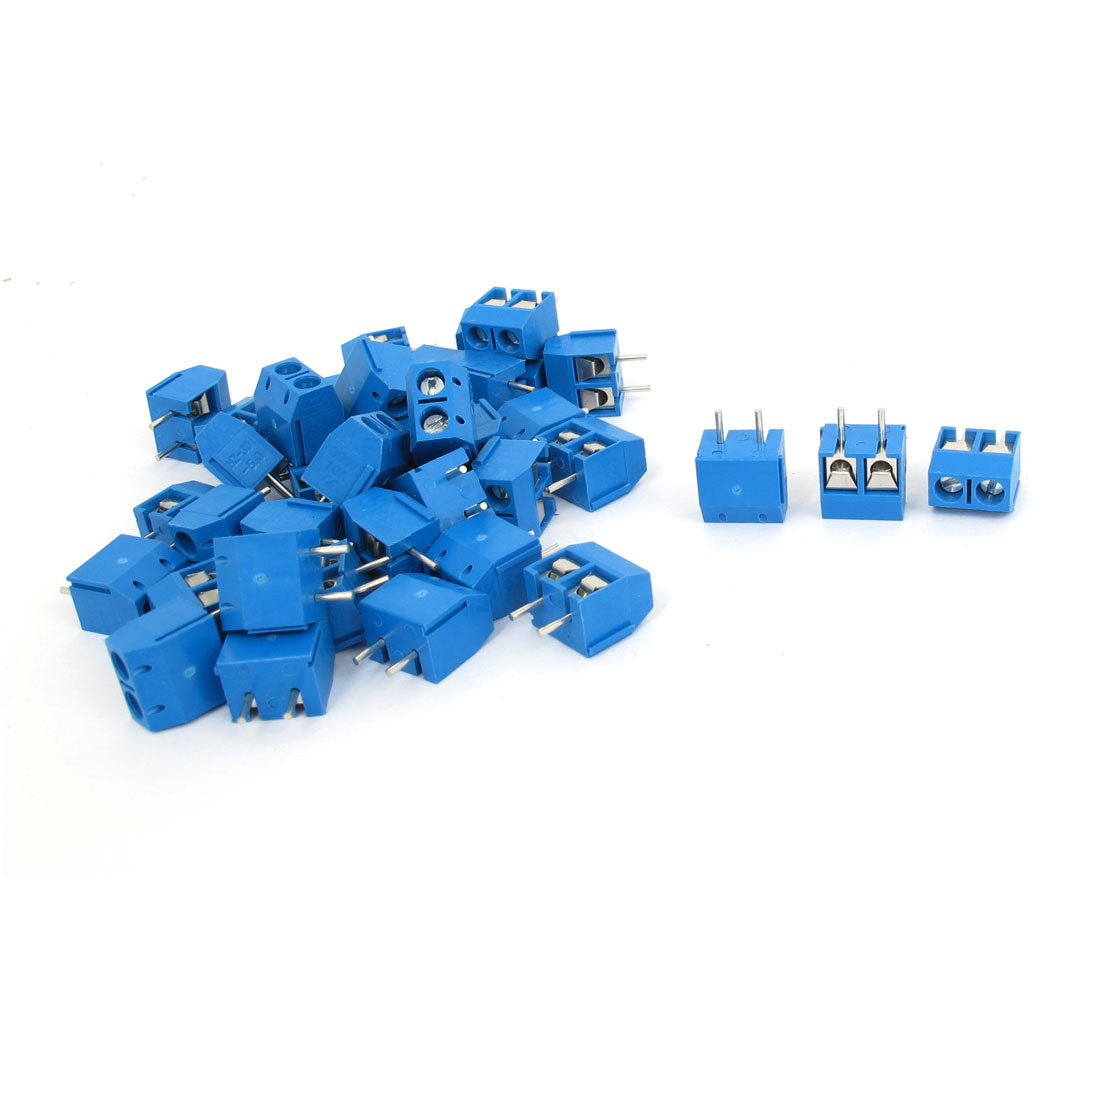 uxcell Uxcell 40 Pcs 2 Pin 5mm Pitch PCB Mount Screw Terminal Block Blue AC 300V 10A